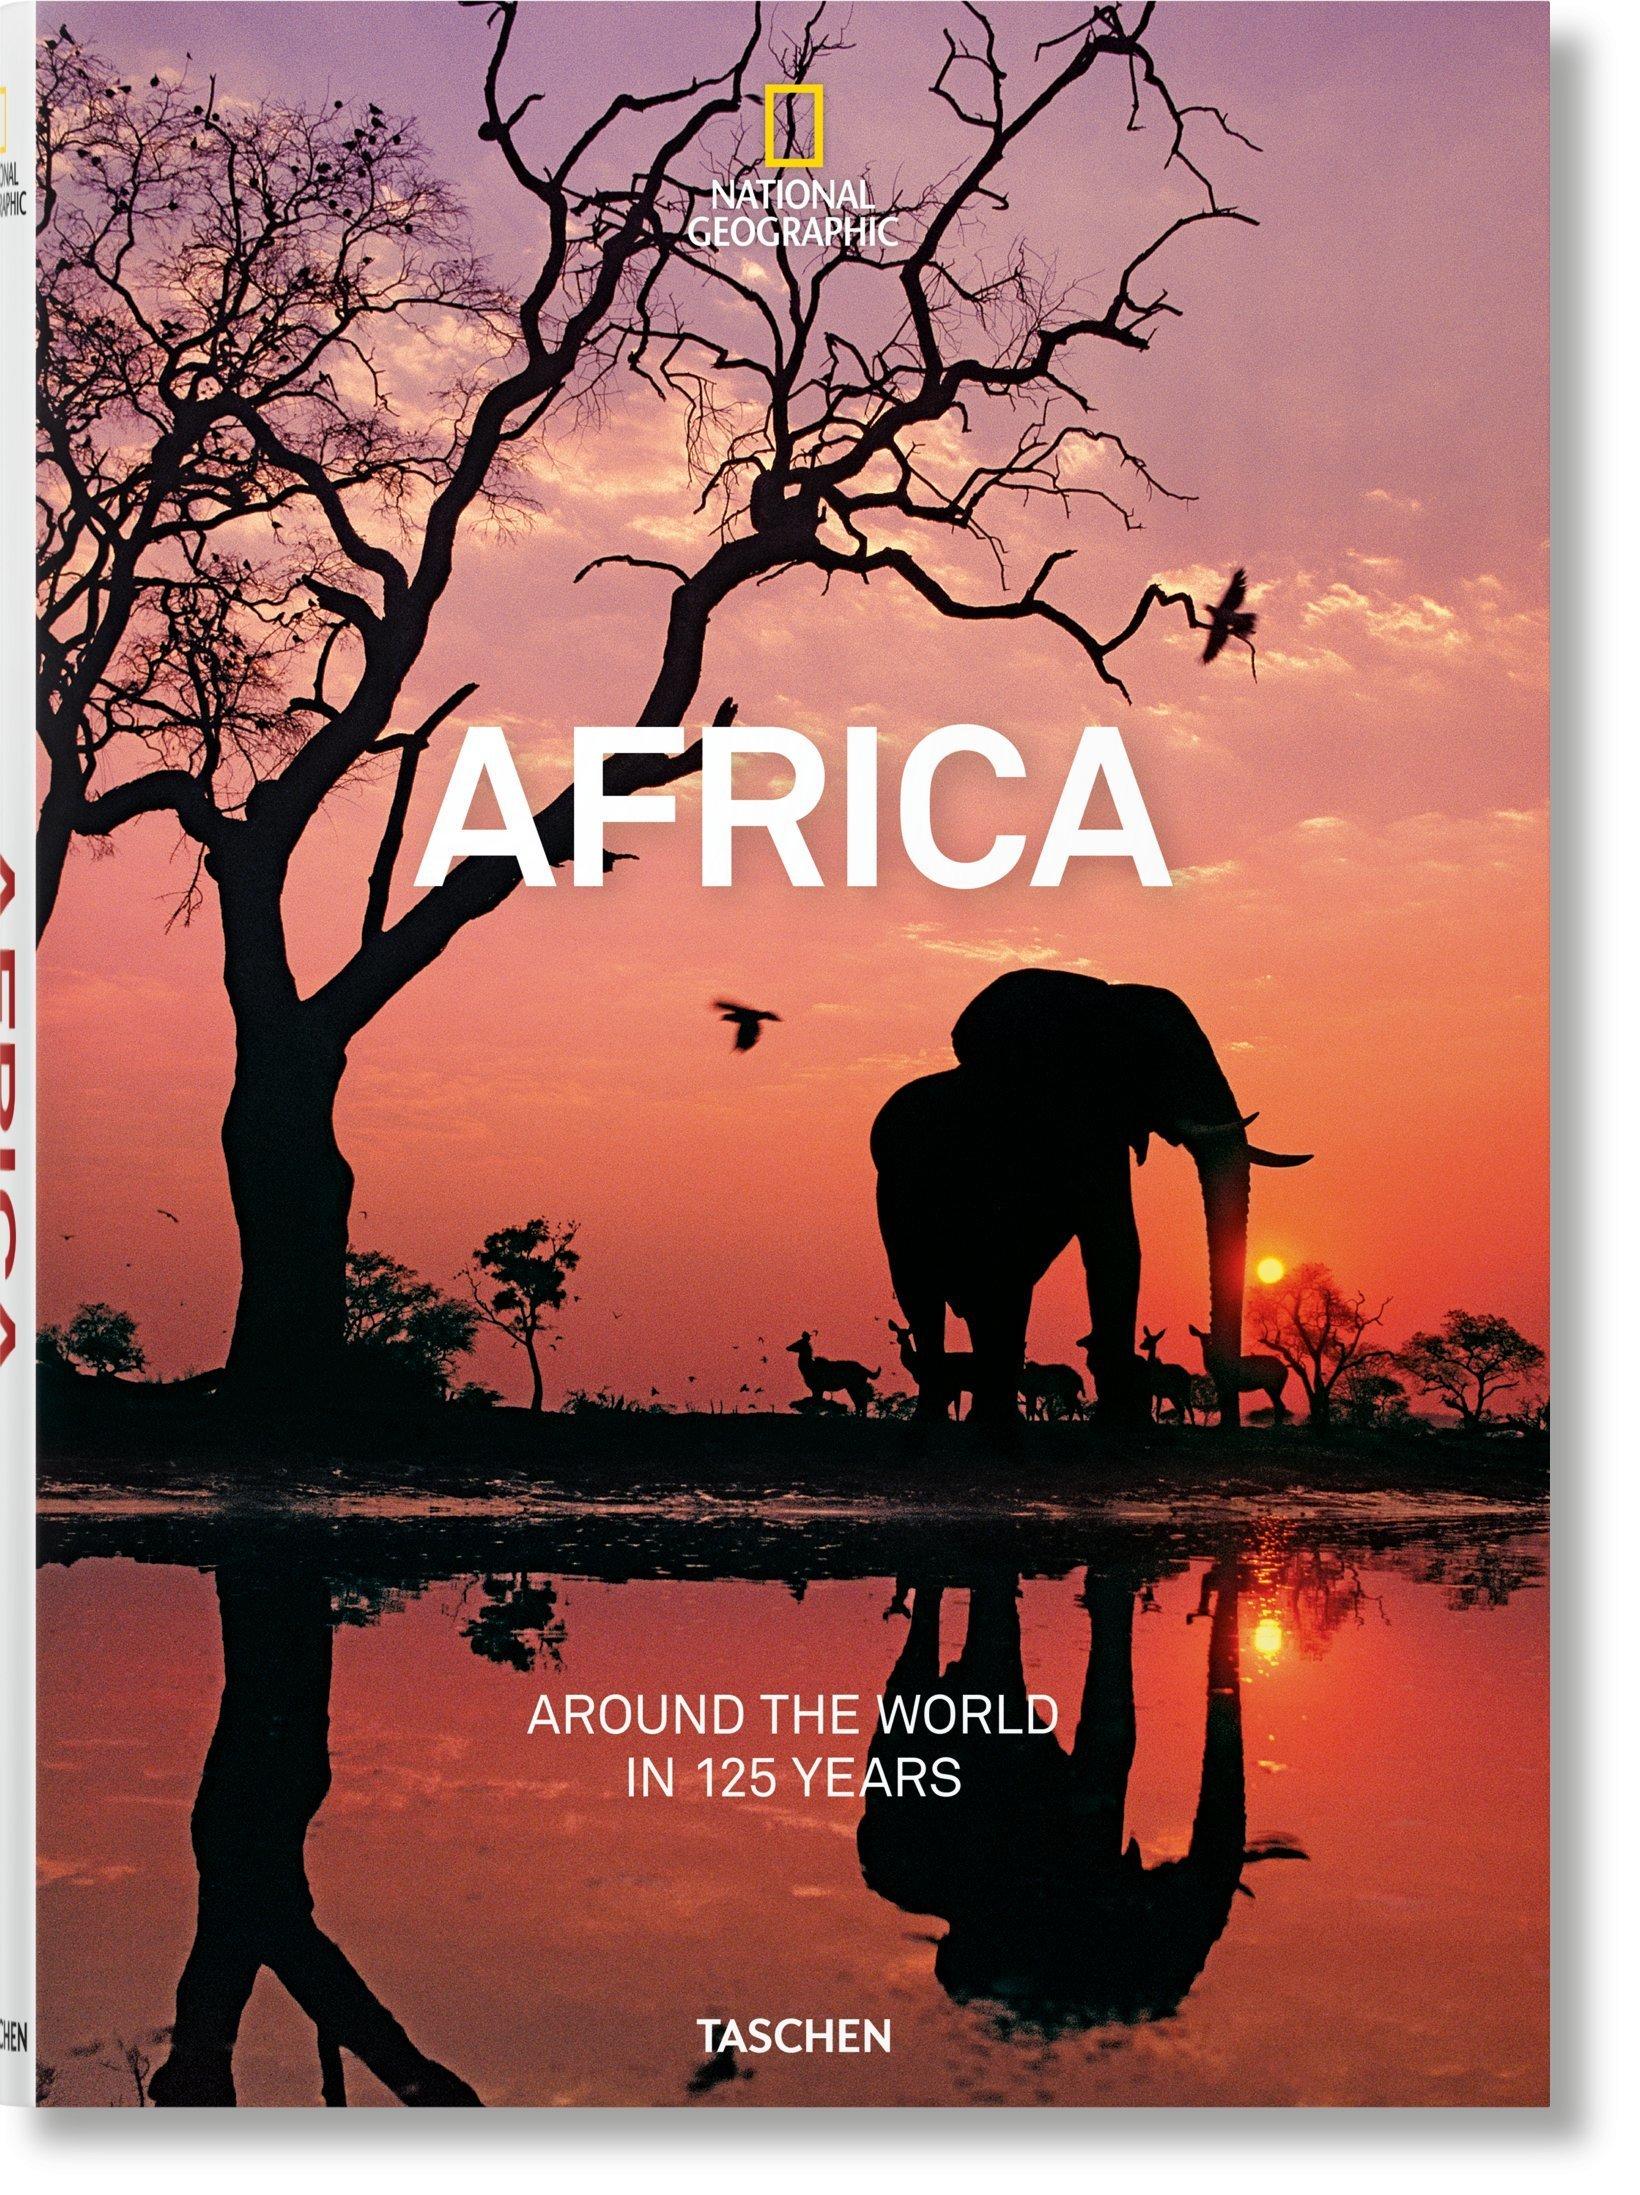 National Geographic: Africa